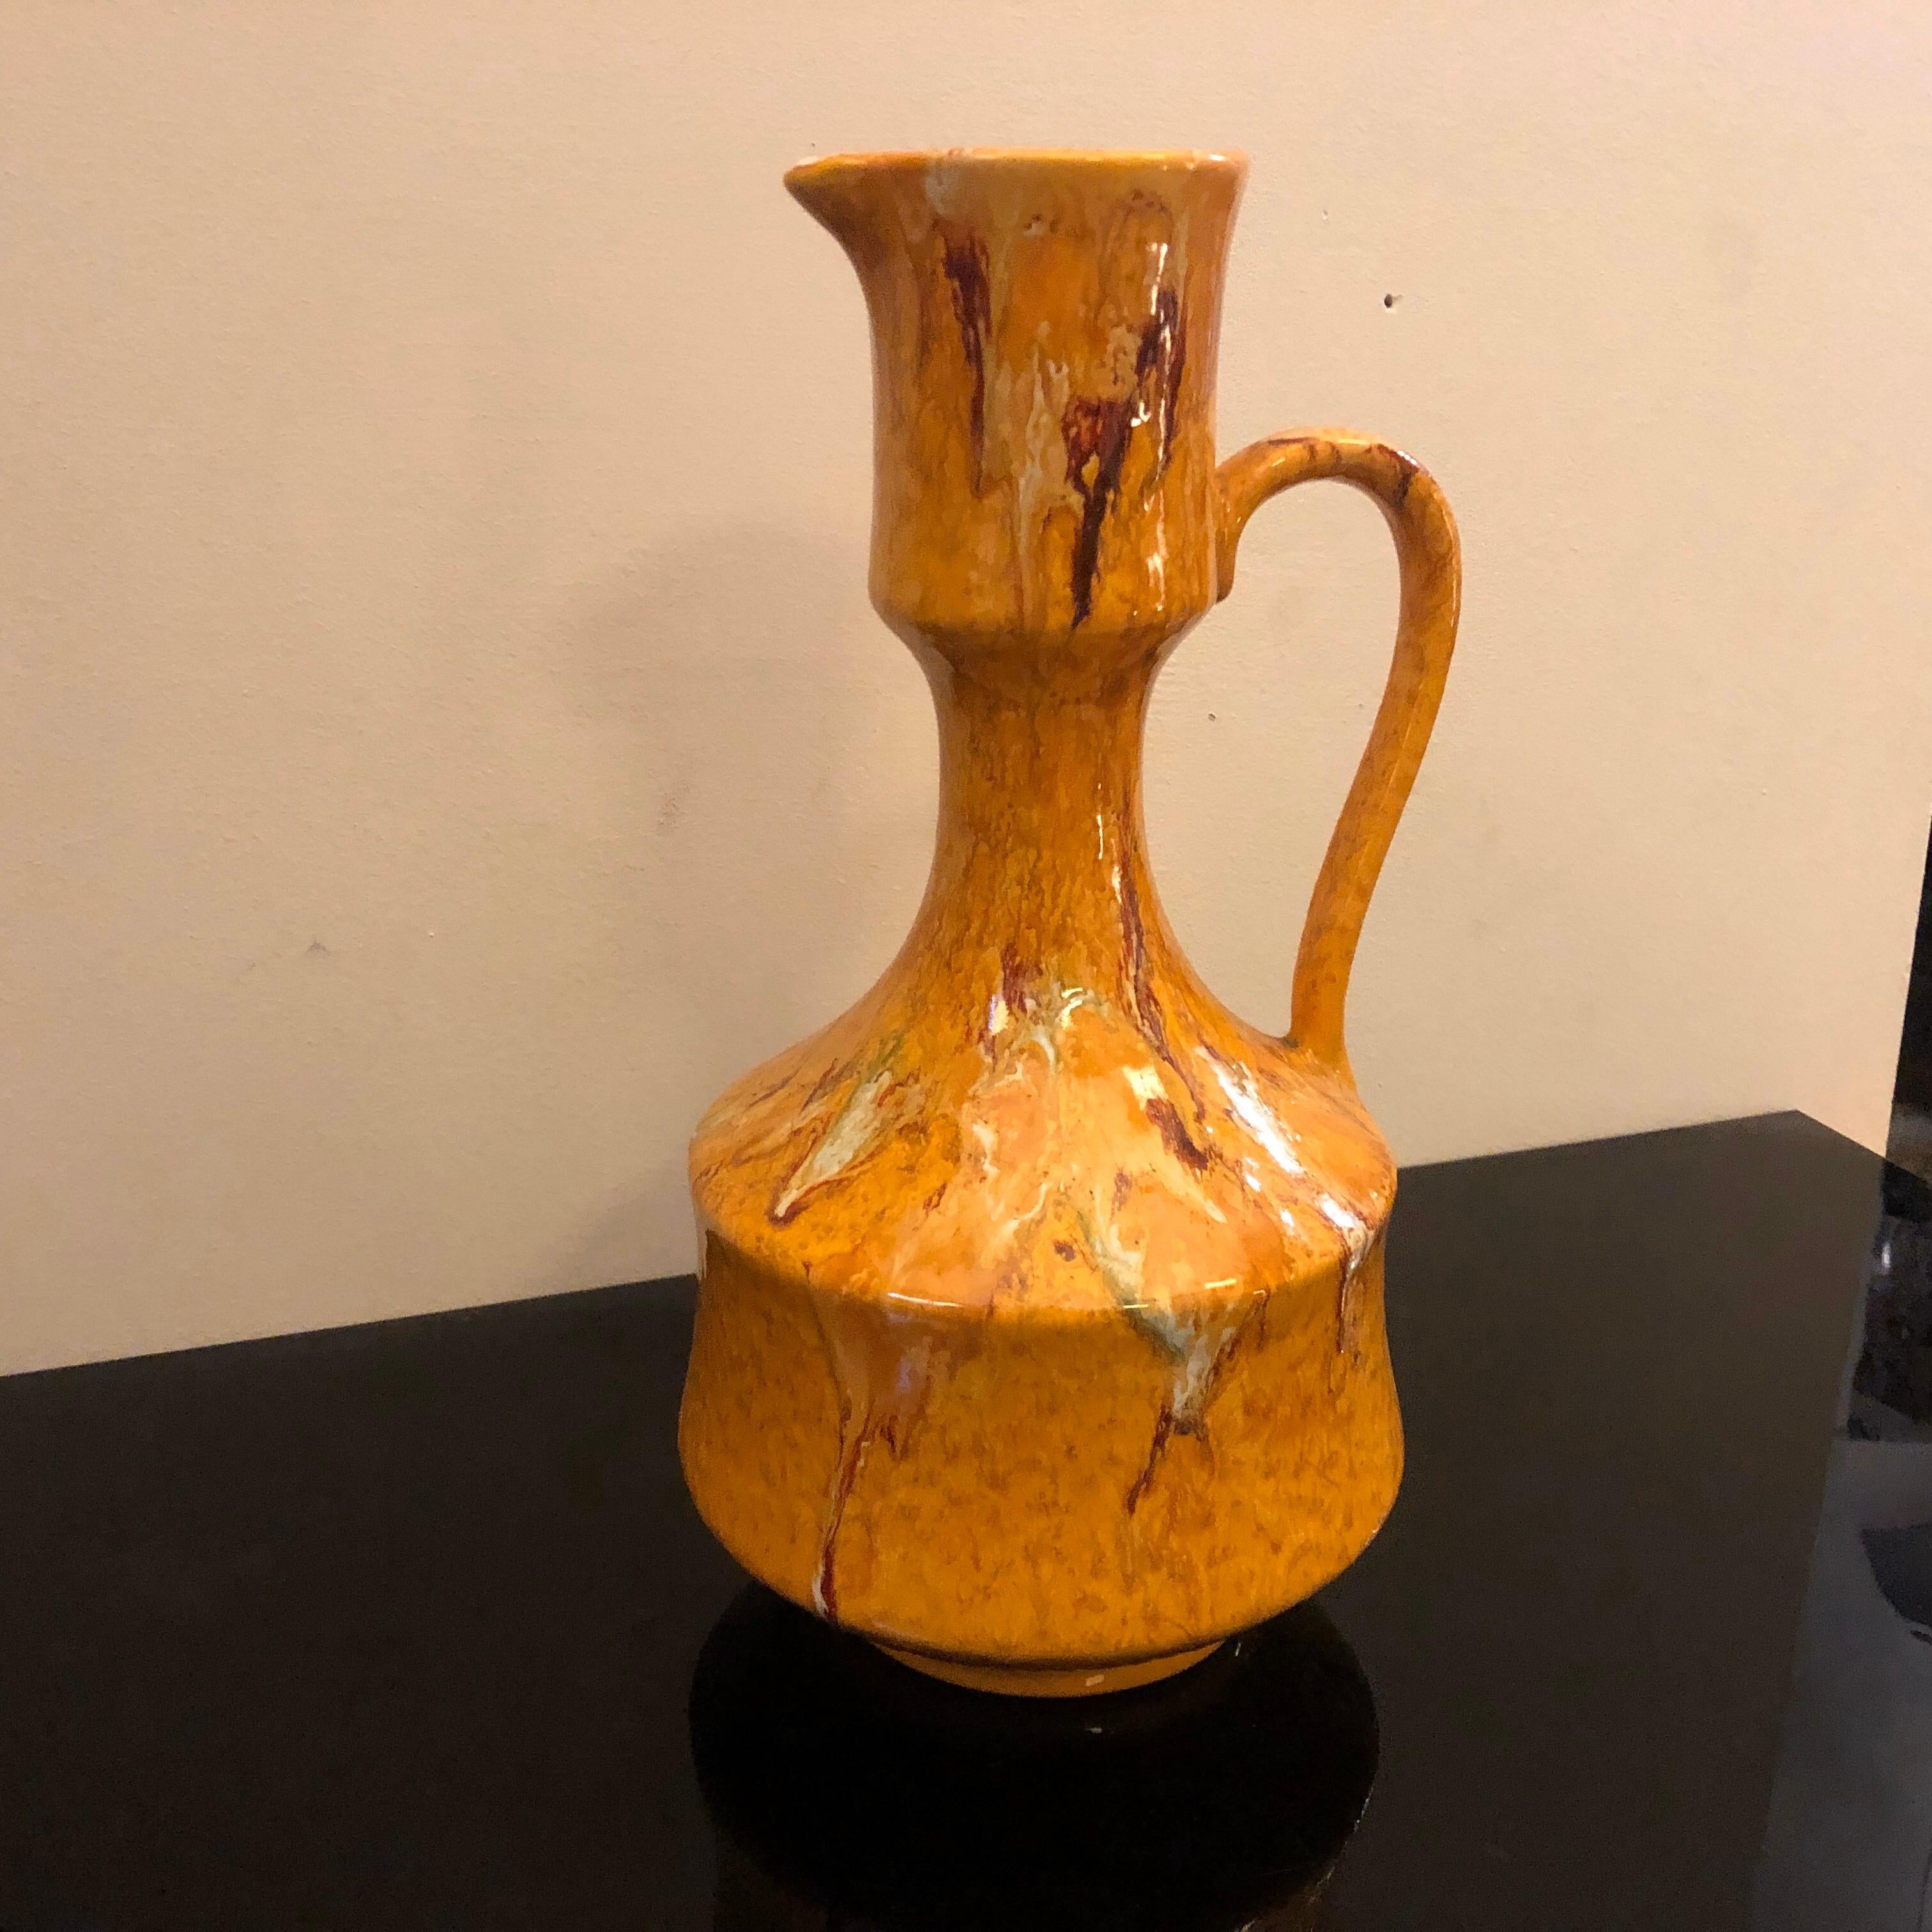 A particular yellow ceramic jug made in Italy in the 1970s by Bertoncello, it's in perfect conditions.